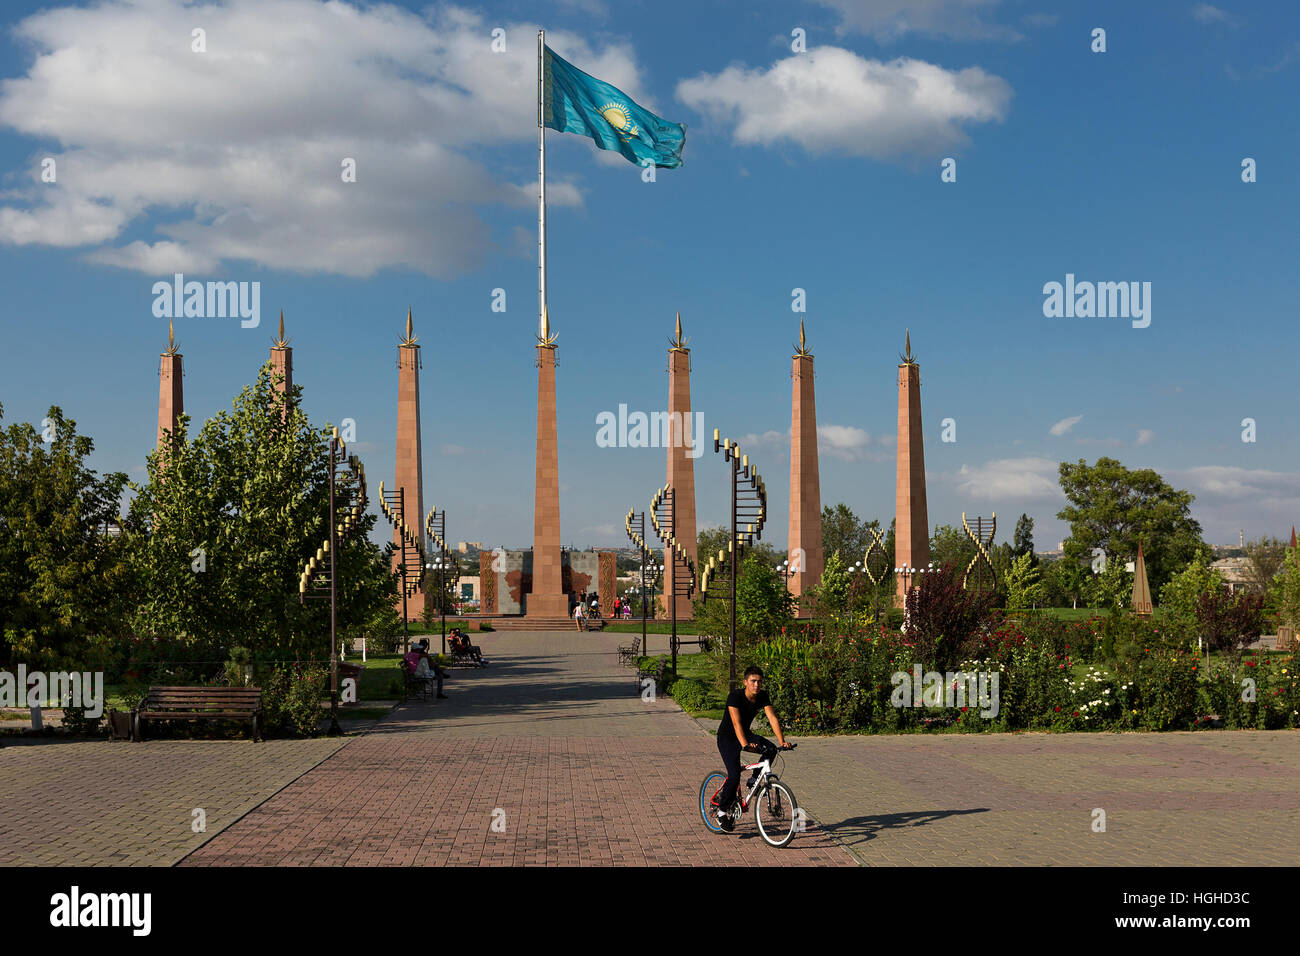 Kazakh boy riding his bicycle in the Park of Independence in Shymkent, Kazakhstan. Stock Photo